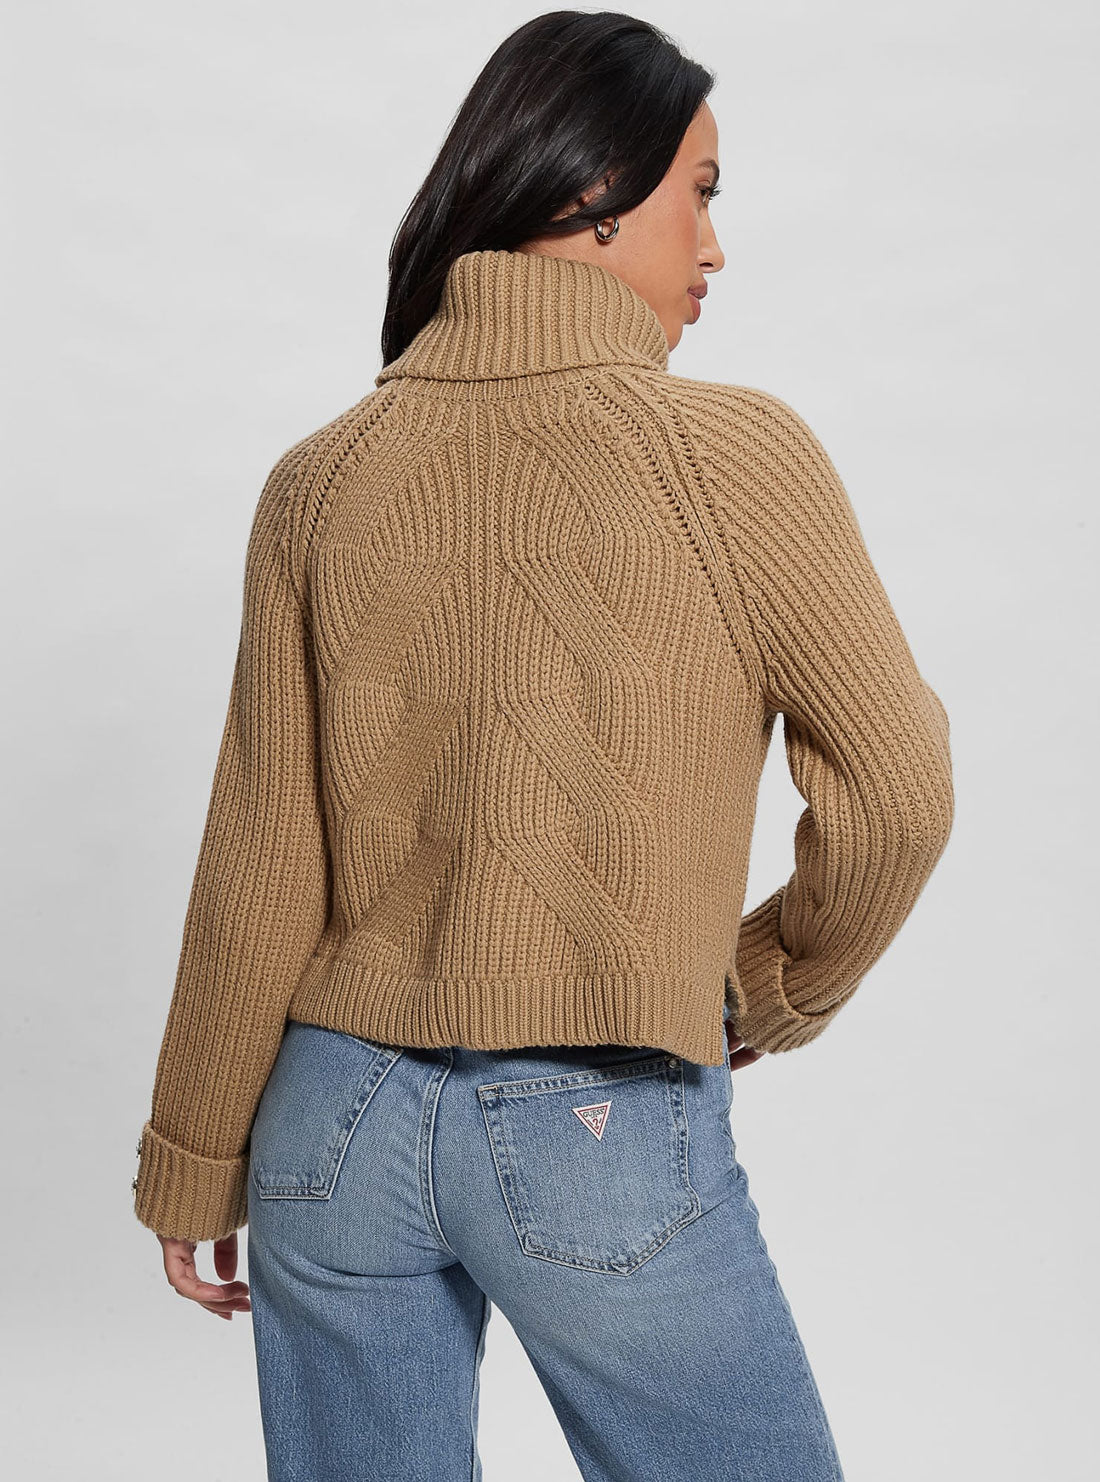 Taupe Brown Lois Turtleneck Knit Top | GUESS Women's Apparel | back view